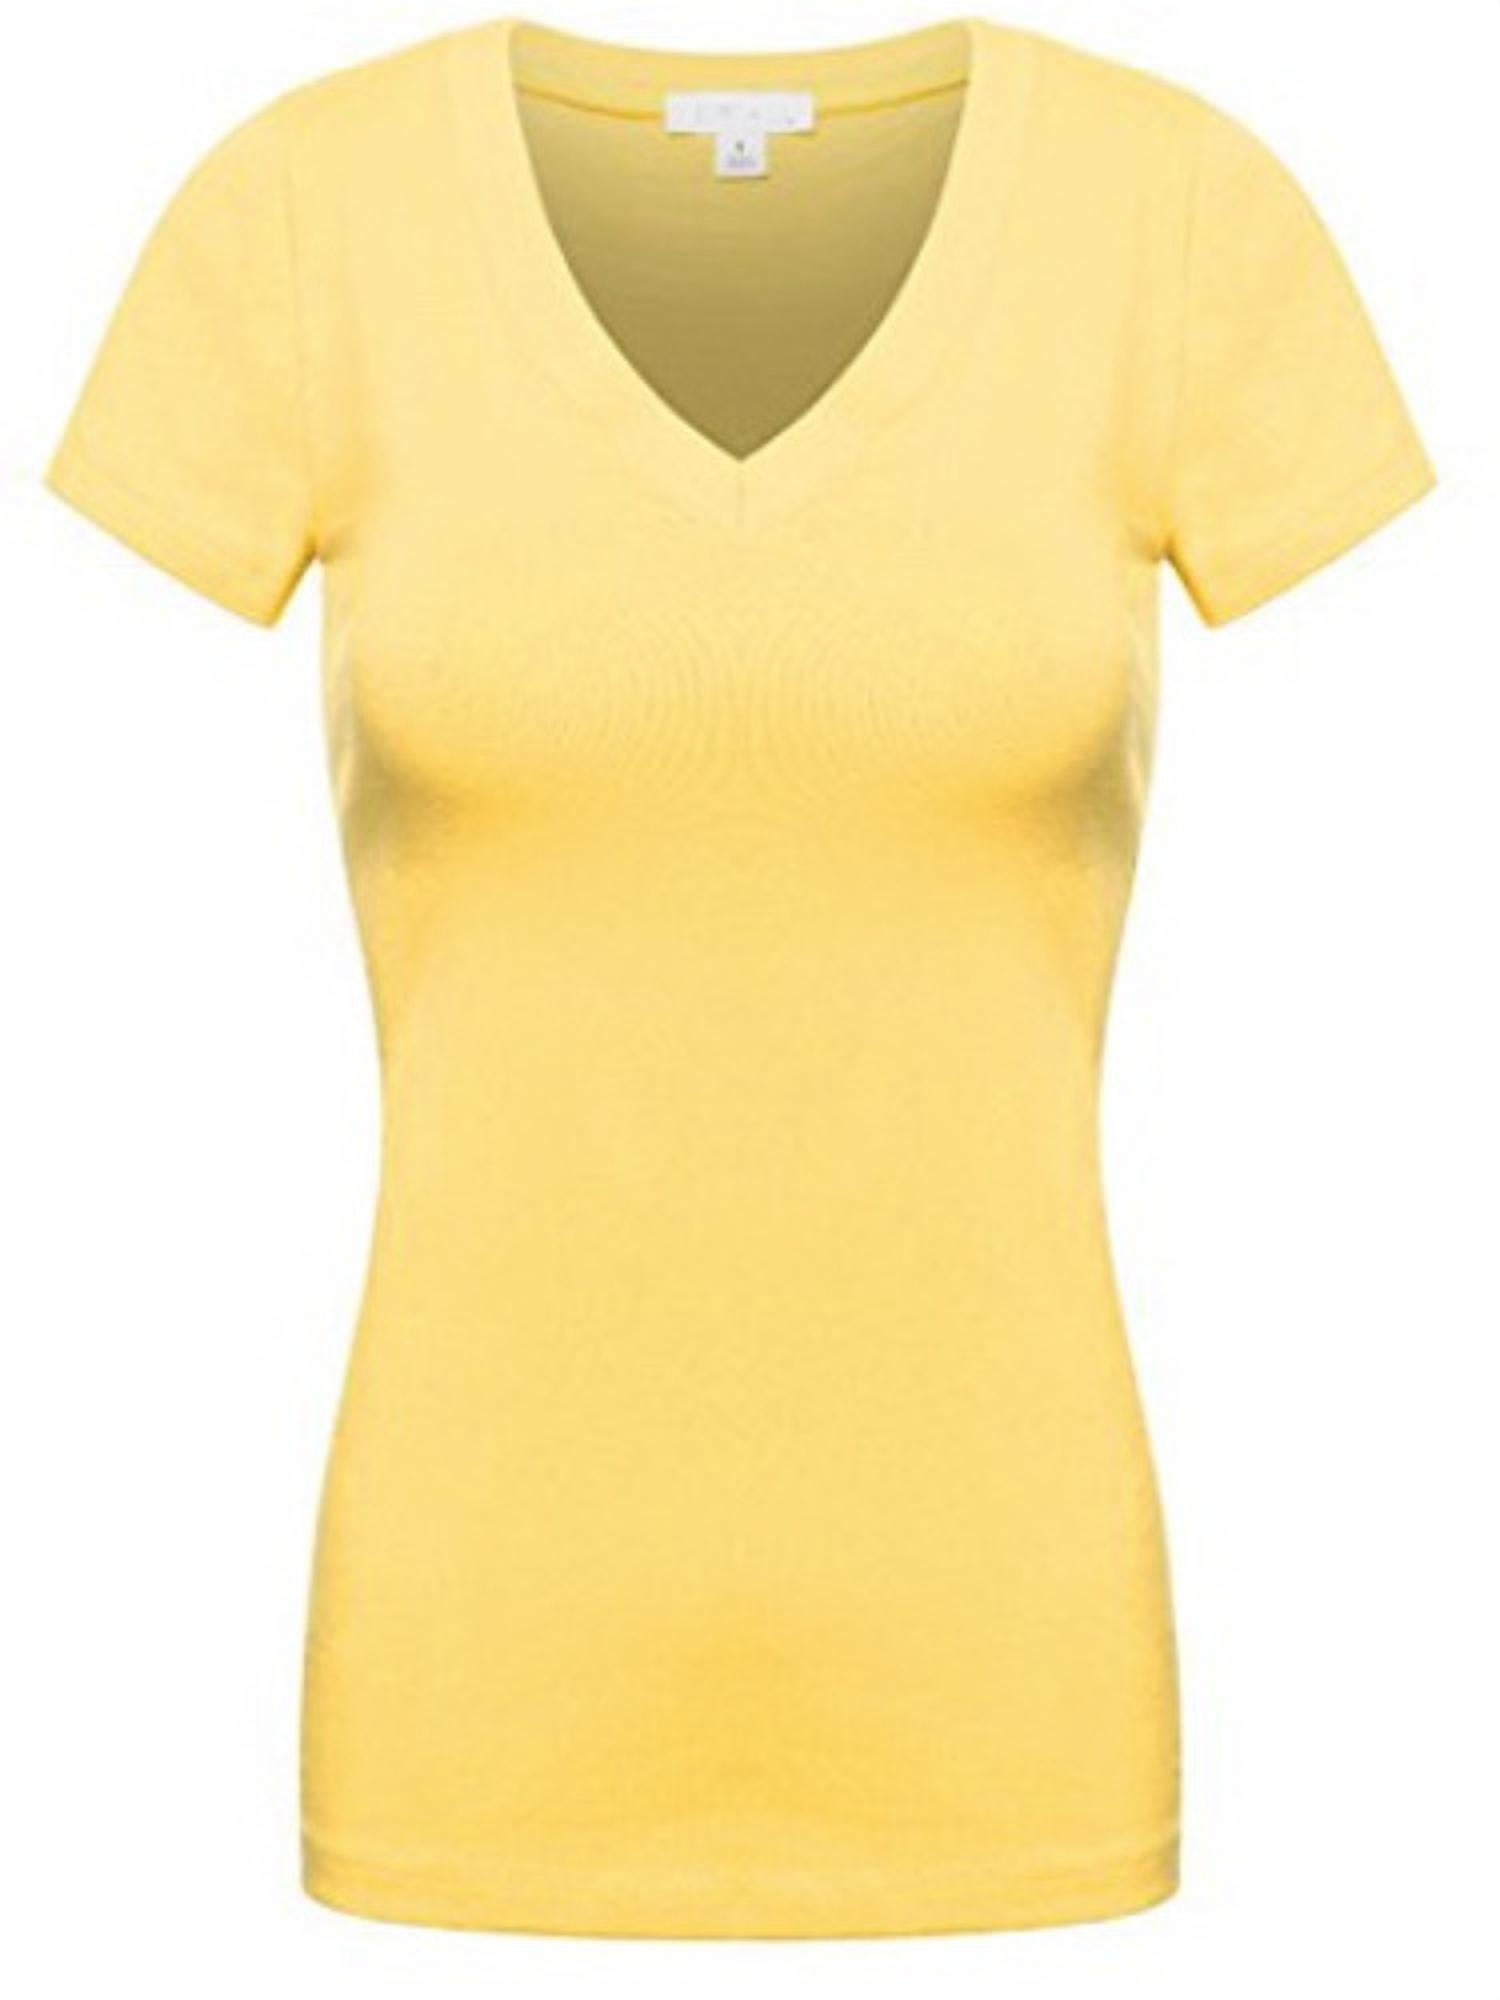 Sexy Plus Size Low-Cut Cleavage V-Neck T-Shirt Tee Top 1x2x3x 